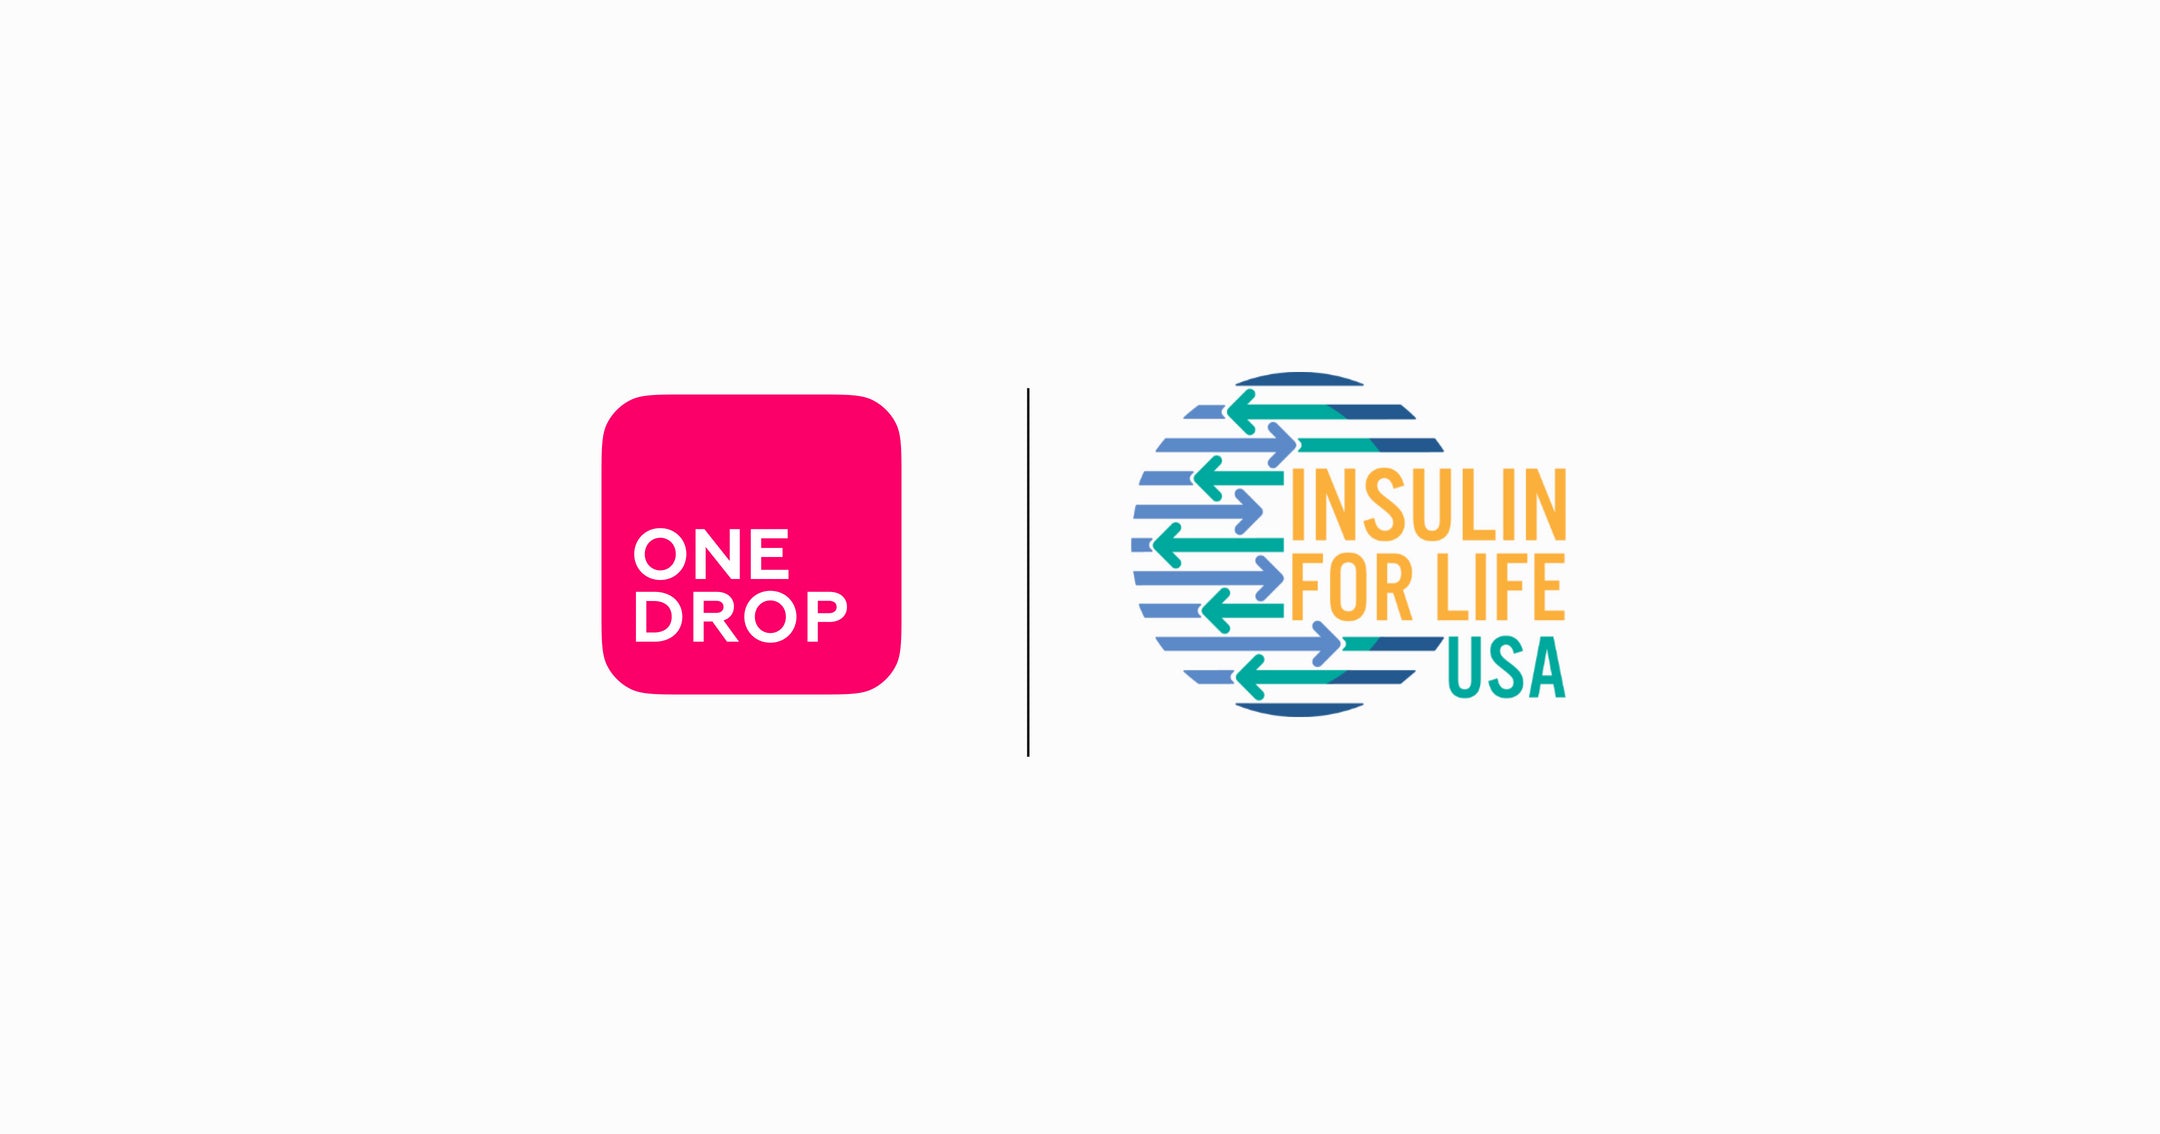 One Drop Gives Back to Diabetes Community with Donation to Insulin for Life USA